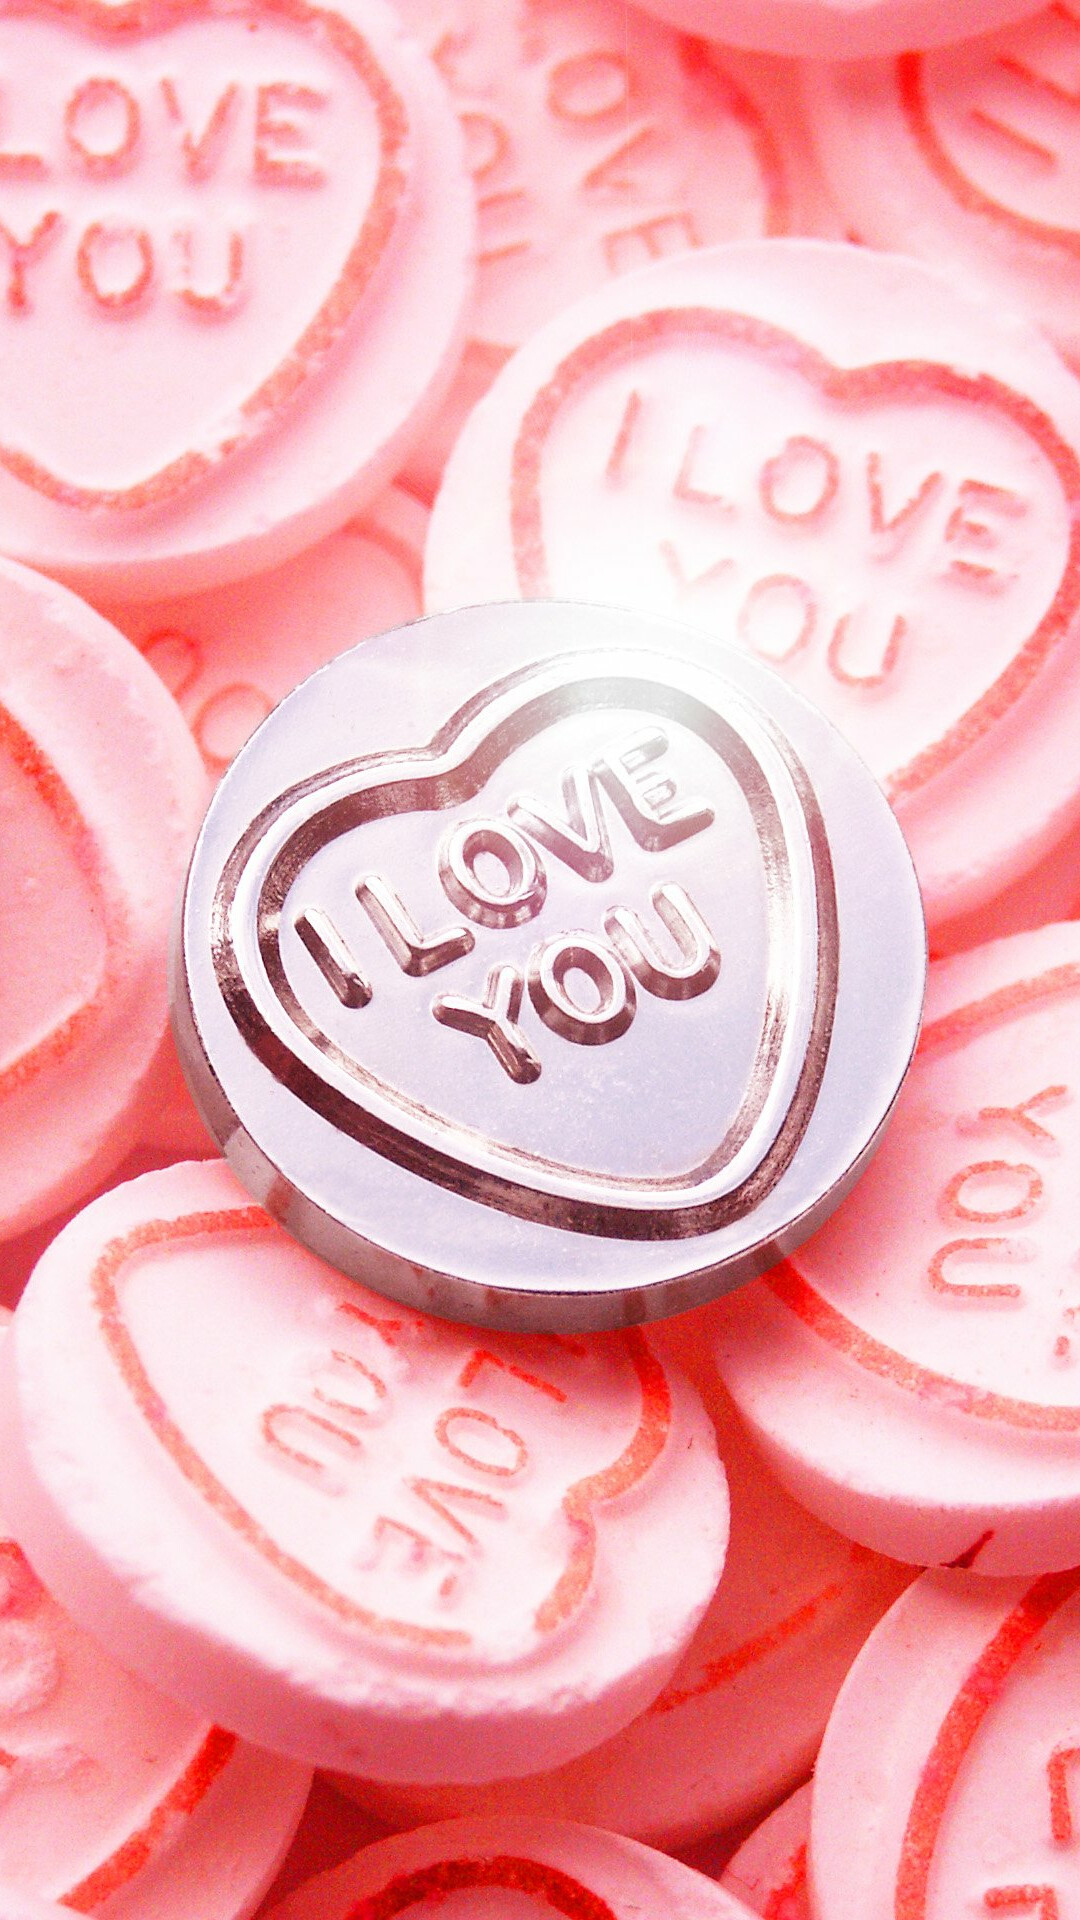 Sweets: Conversation hearts, Small heart-shaped sugar candies sold around Valentine's Day. 1080x1920 Full HD Wallpaper.